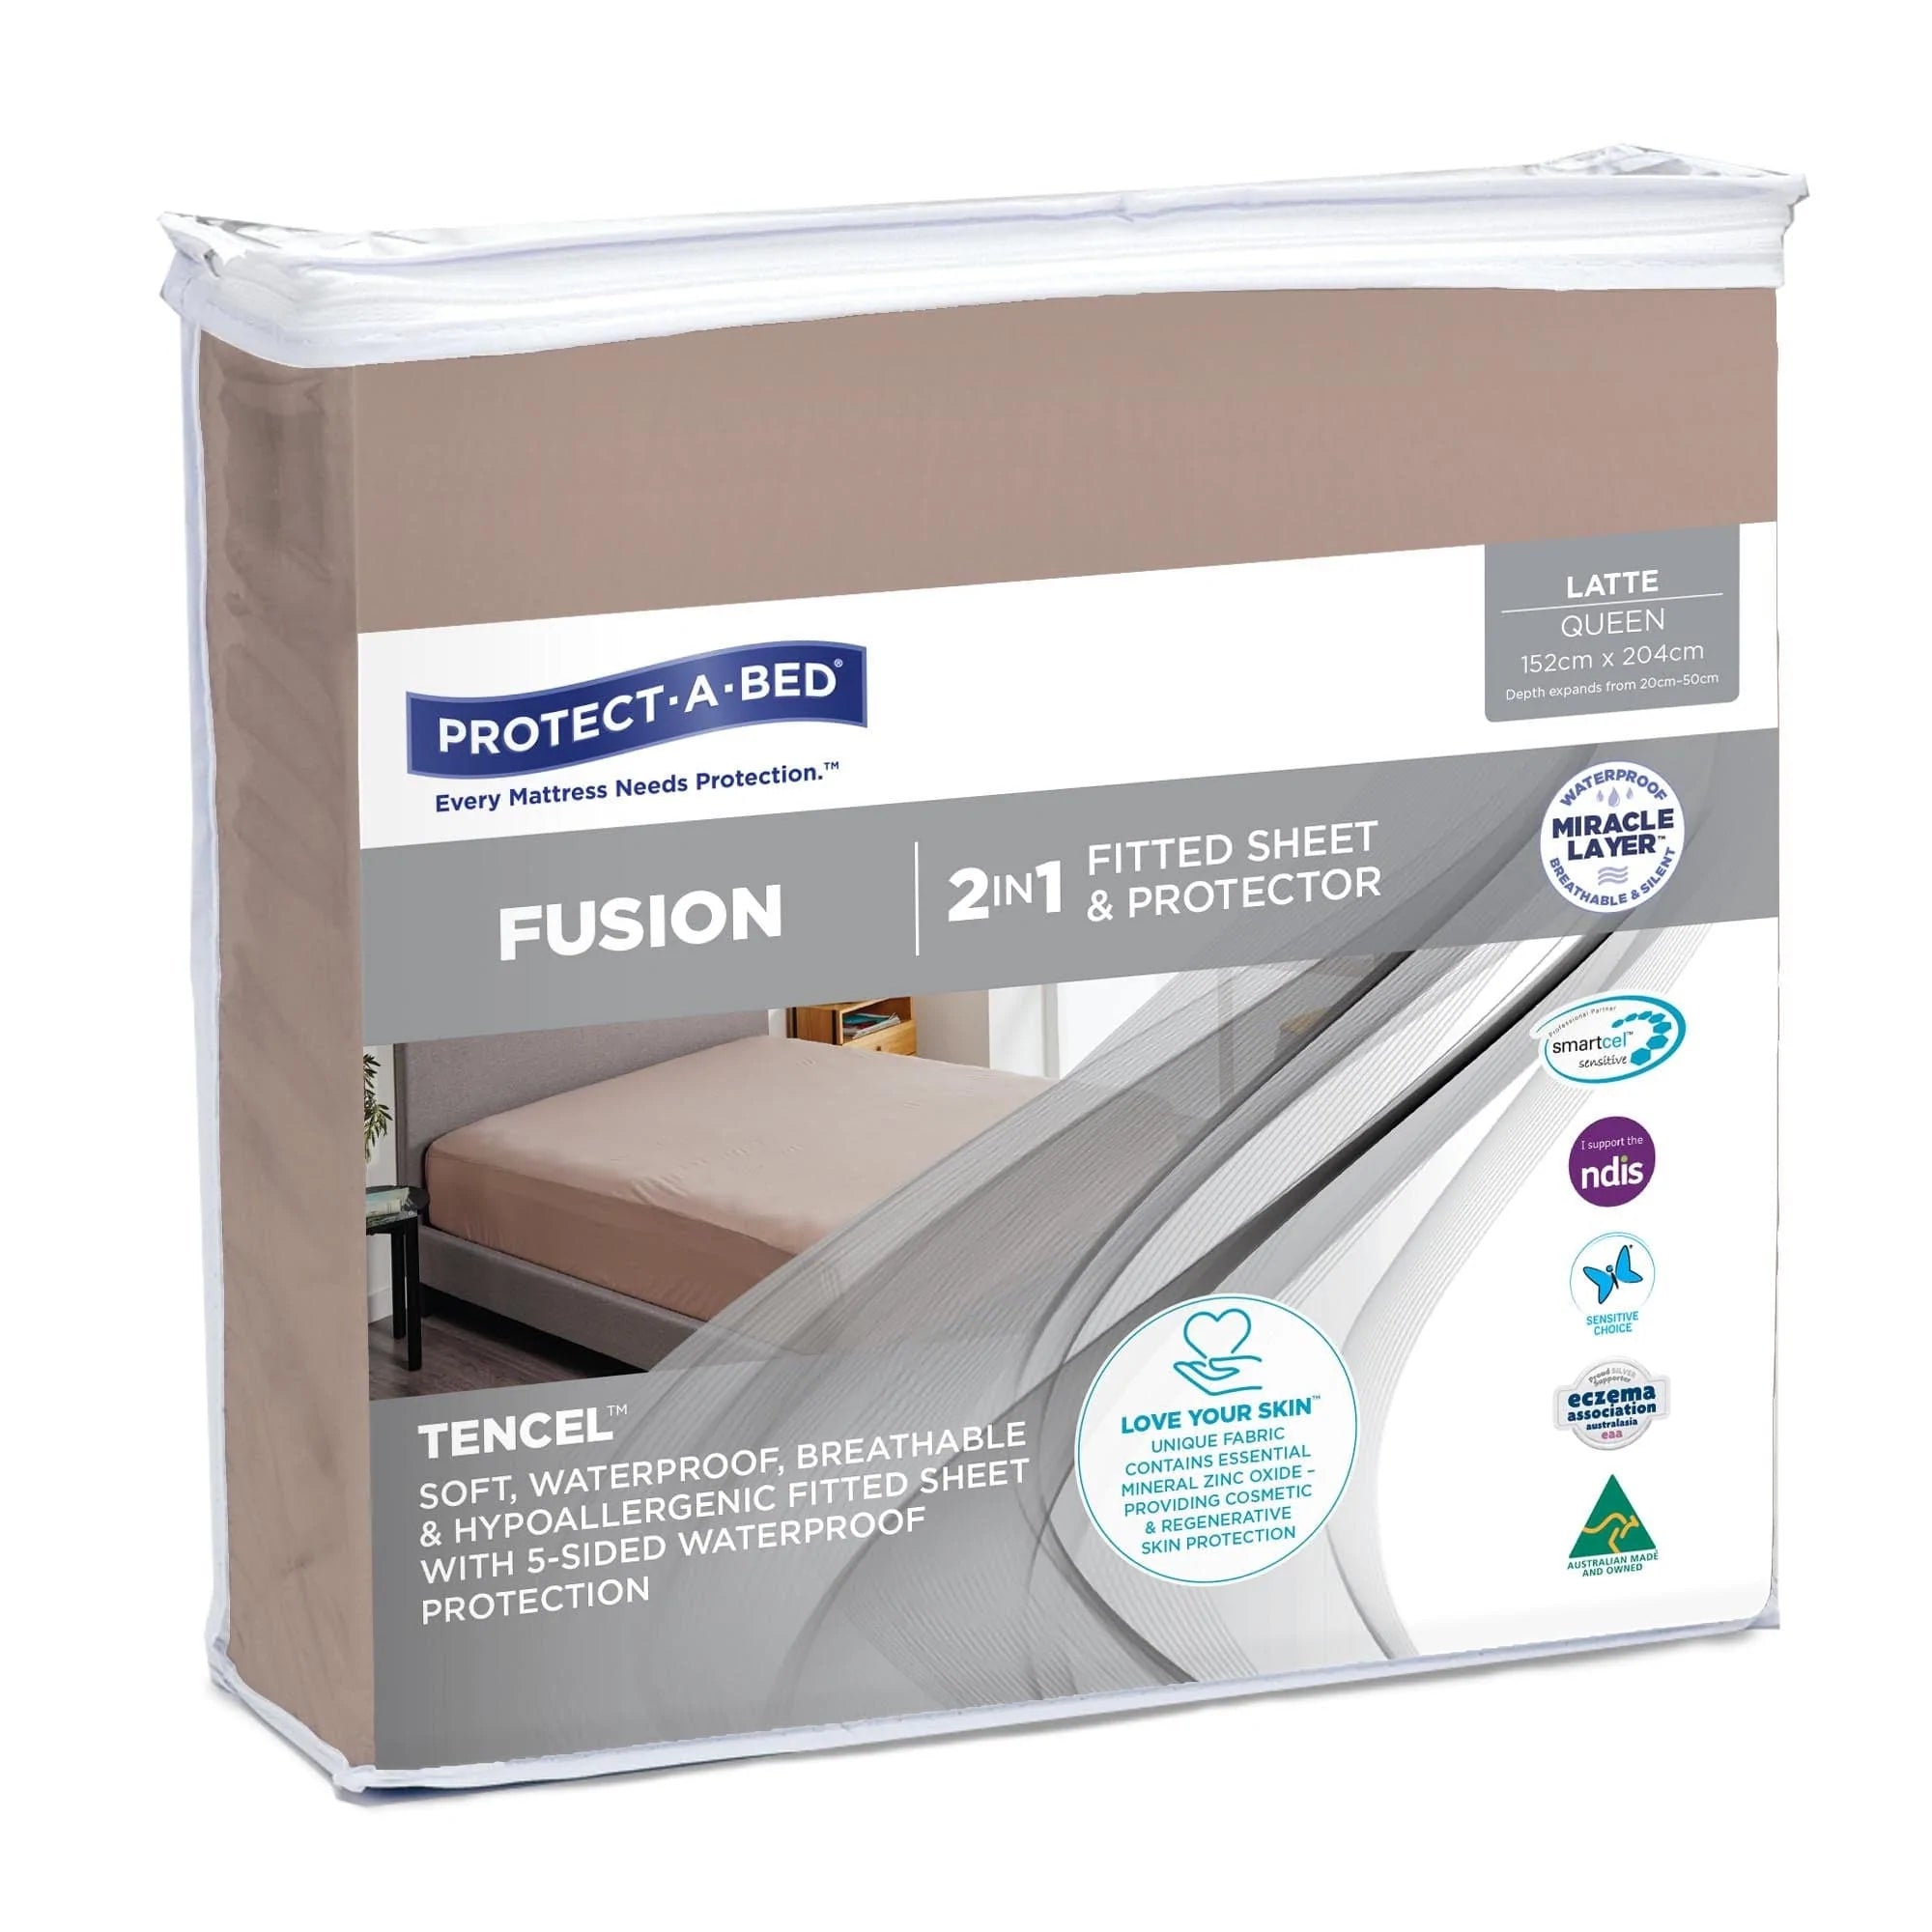 Protect A Bed Queen / Latte Fusion Fitted Sheet SNUF0095QUE0__EA